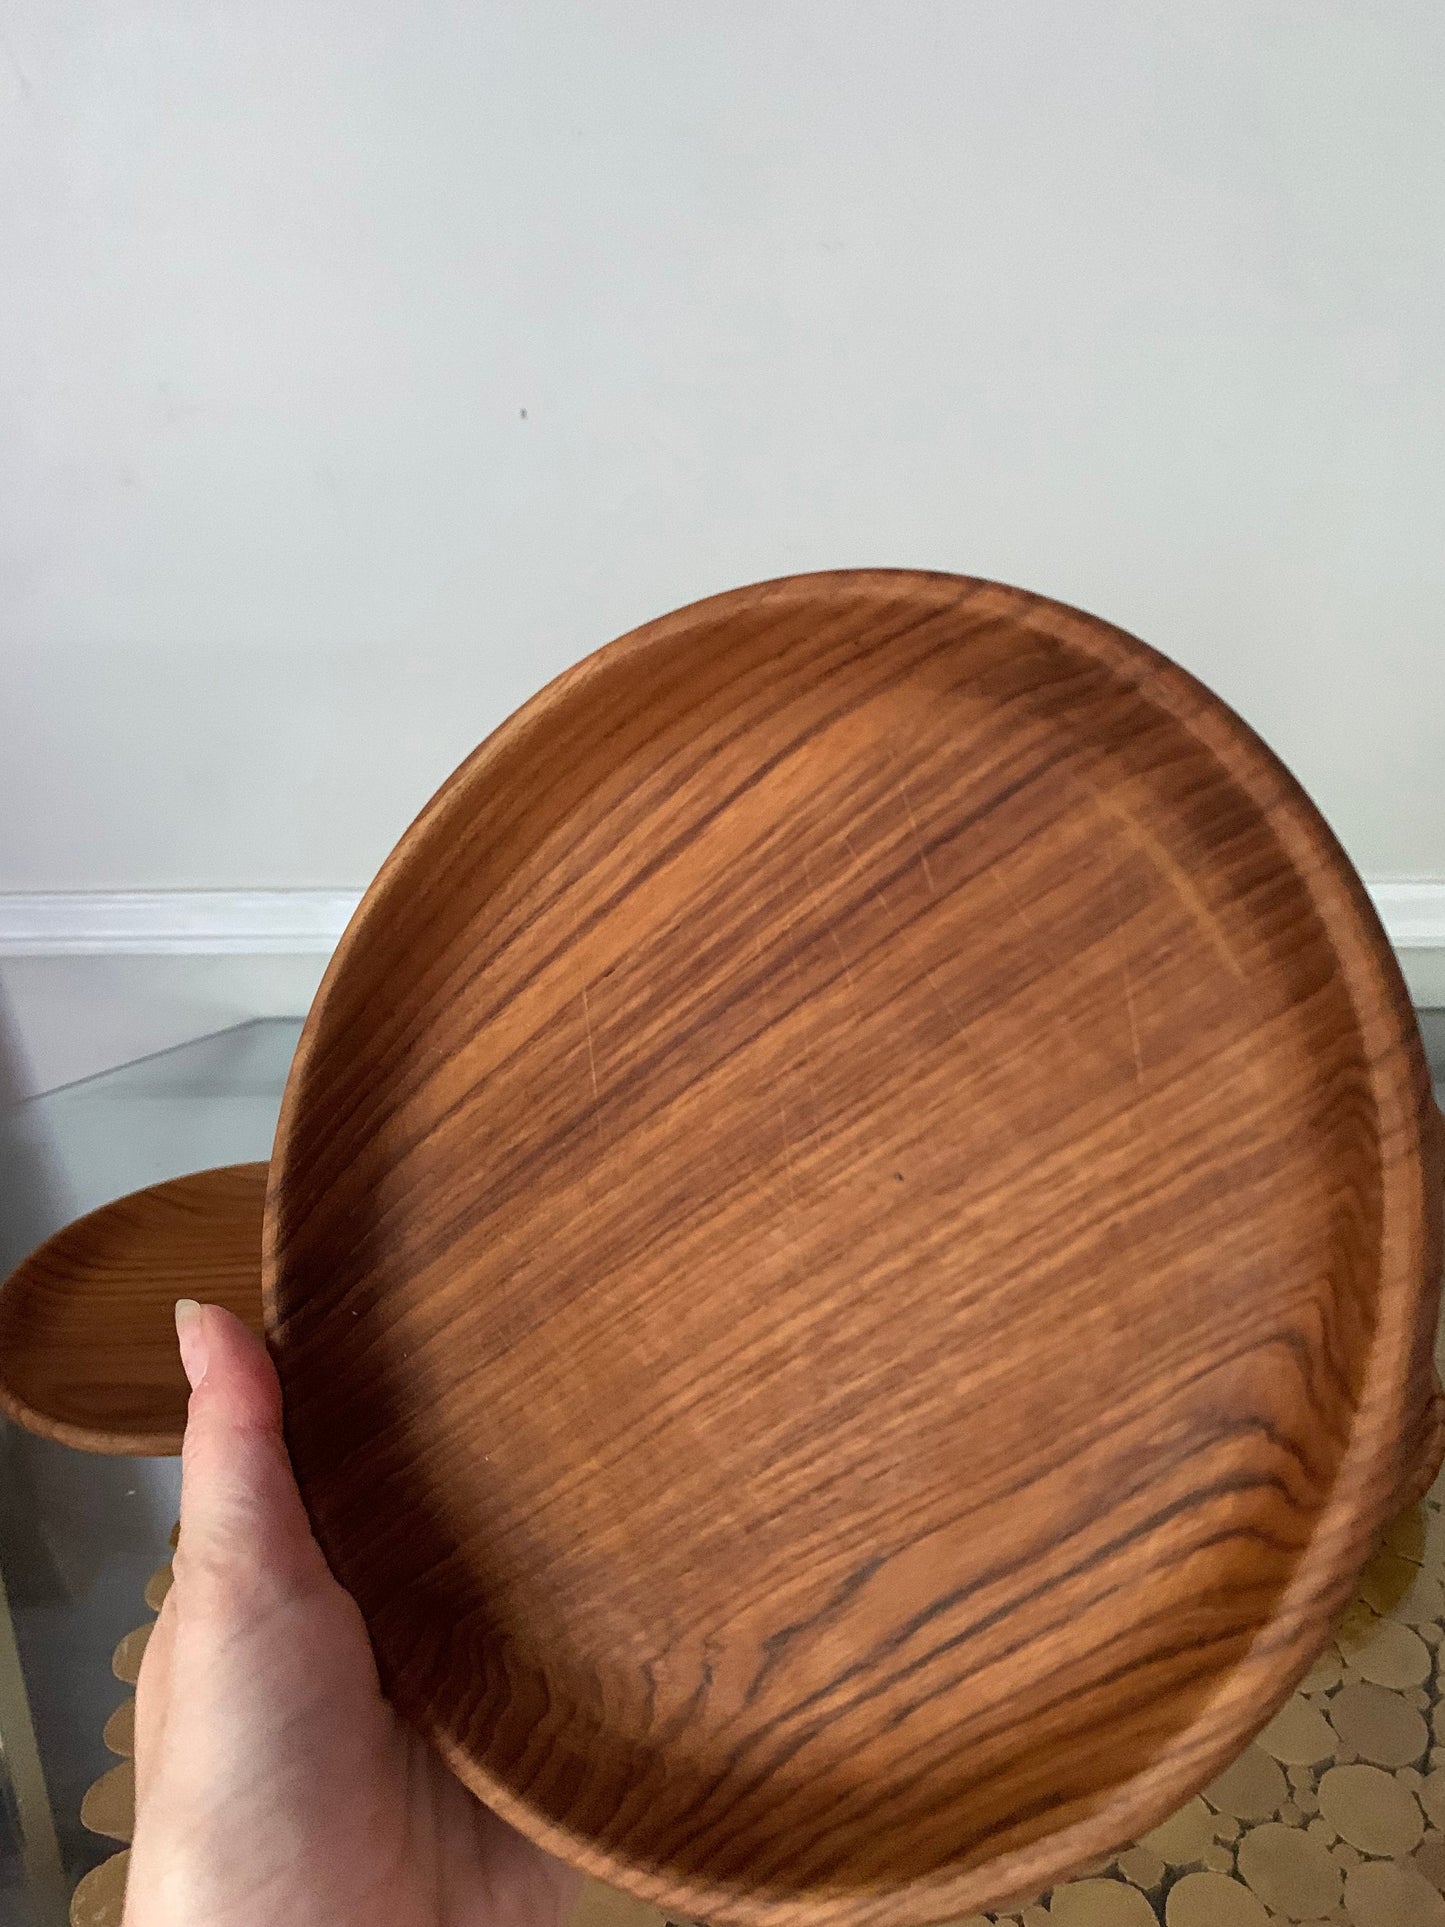 Retro 5 Piece Teak Wooden Salad Bowl and Plate Set with Tongs